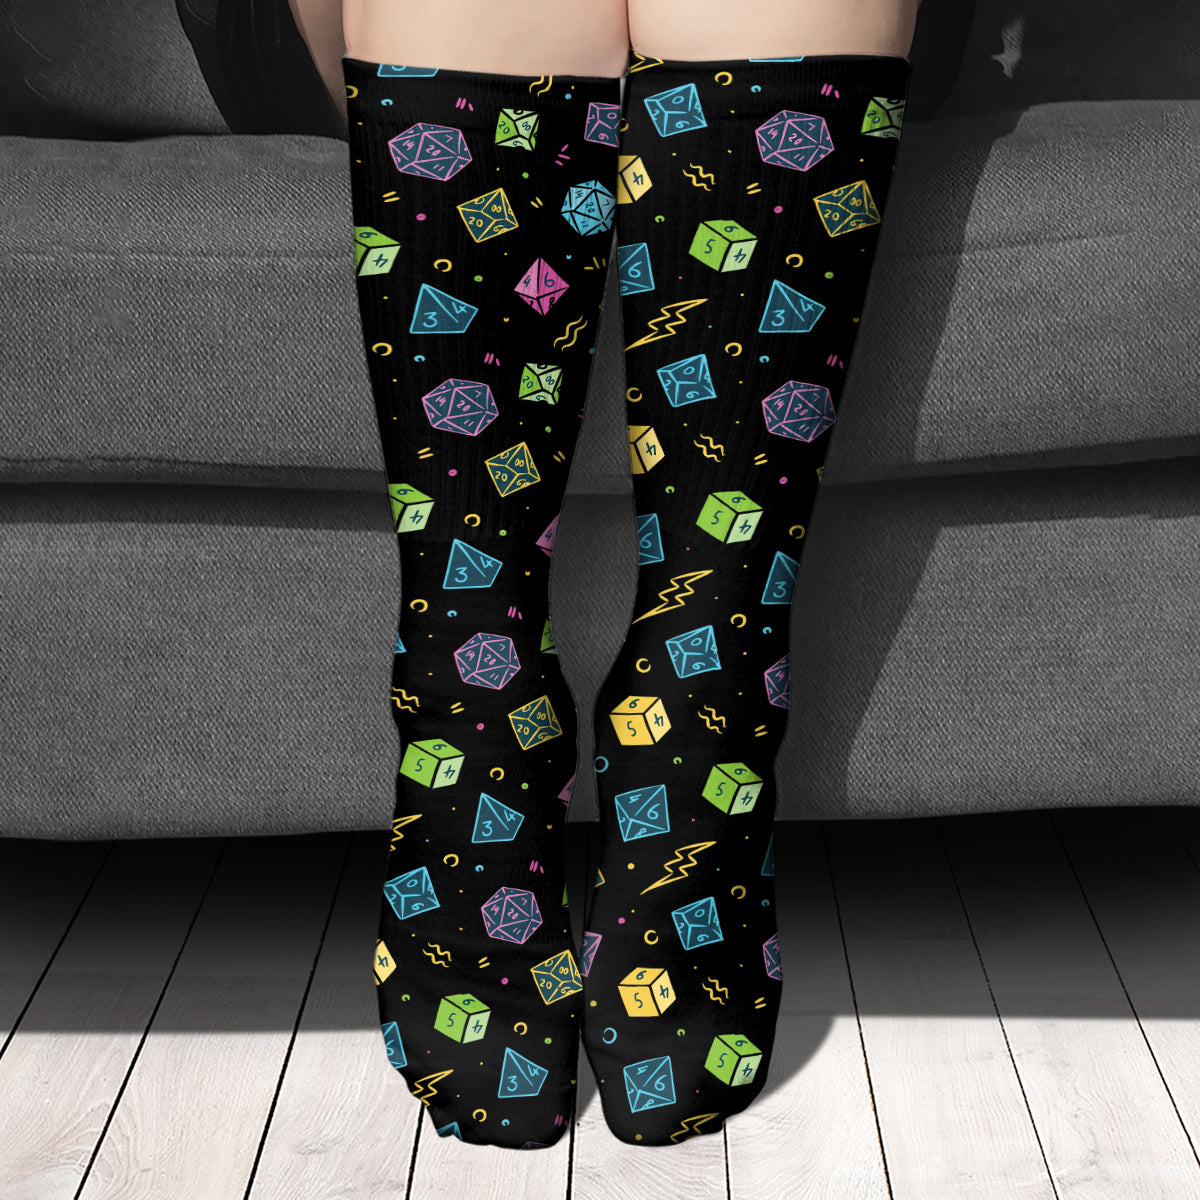 Dungeon Dad - Personalized RPG Socks